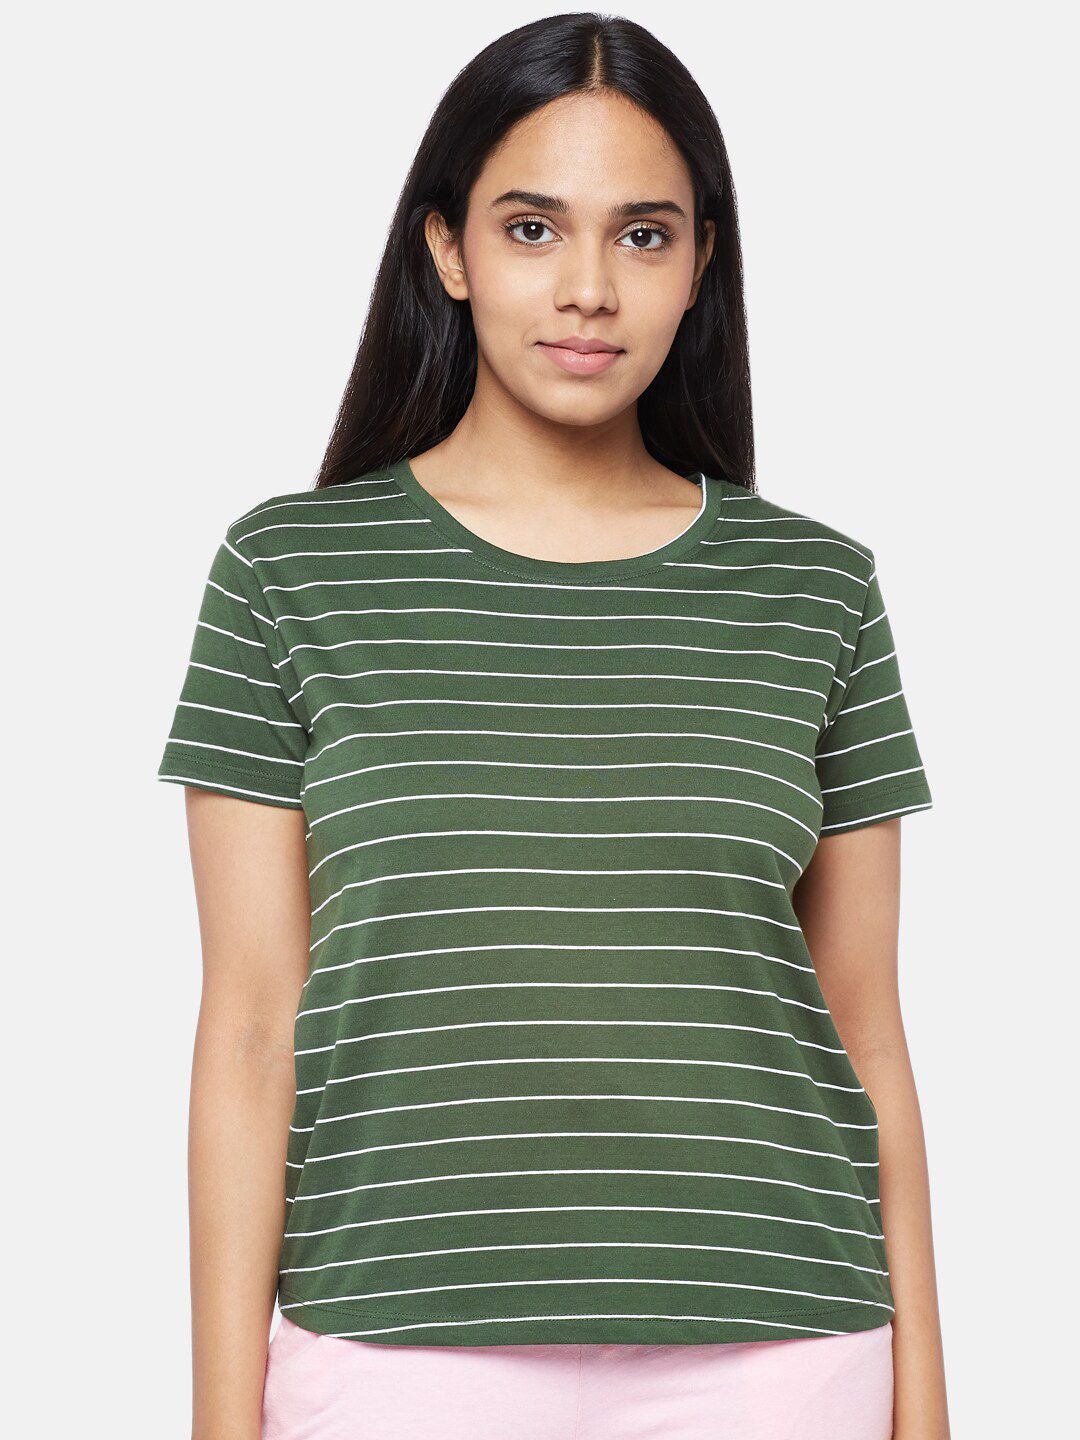 Dreamz by Pantaloons Olive Green Striped Regular Lounge tshirt Price in India